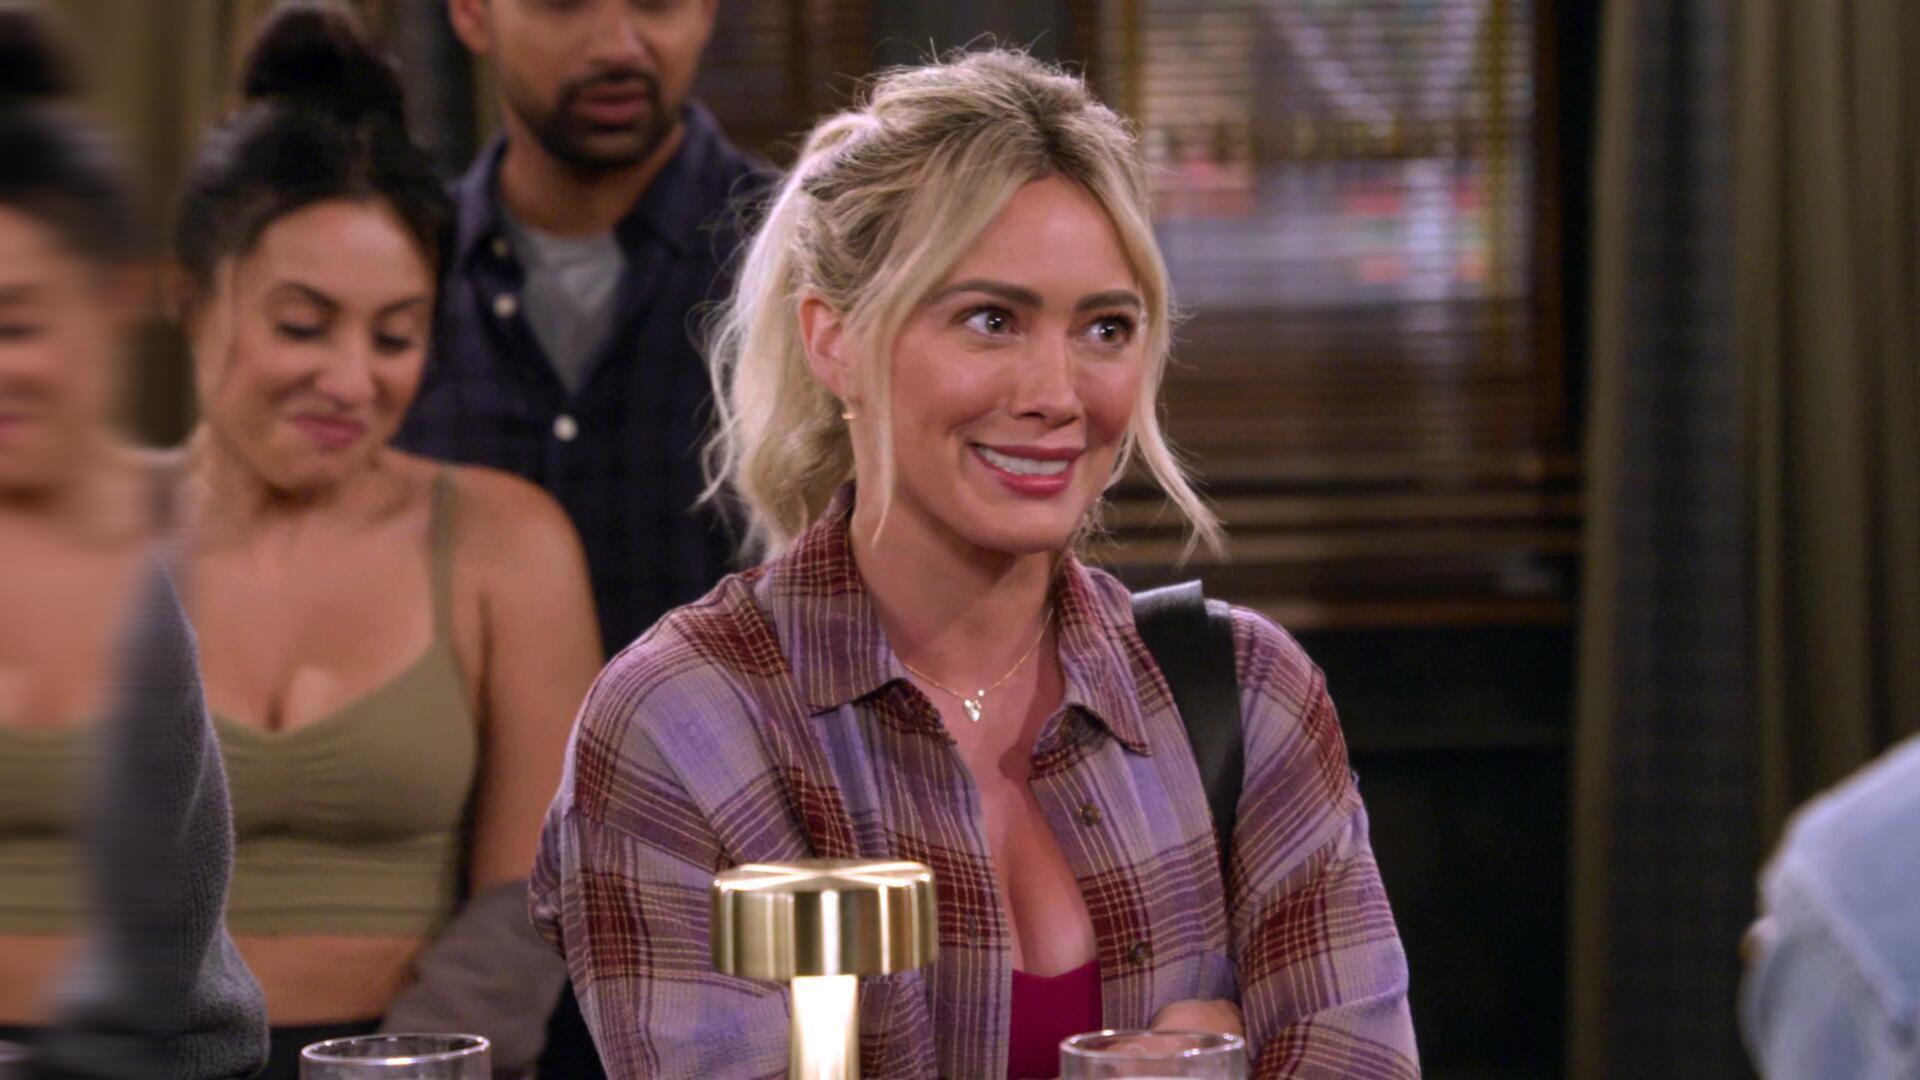 Hilary Duff – How I Met Your Father | Season 2 Episode 2